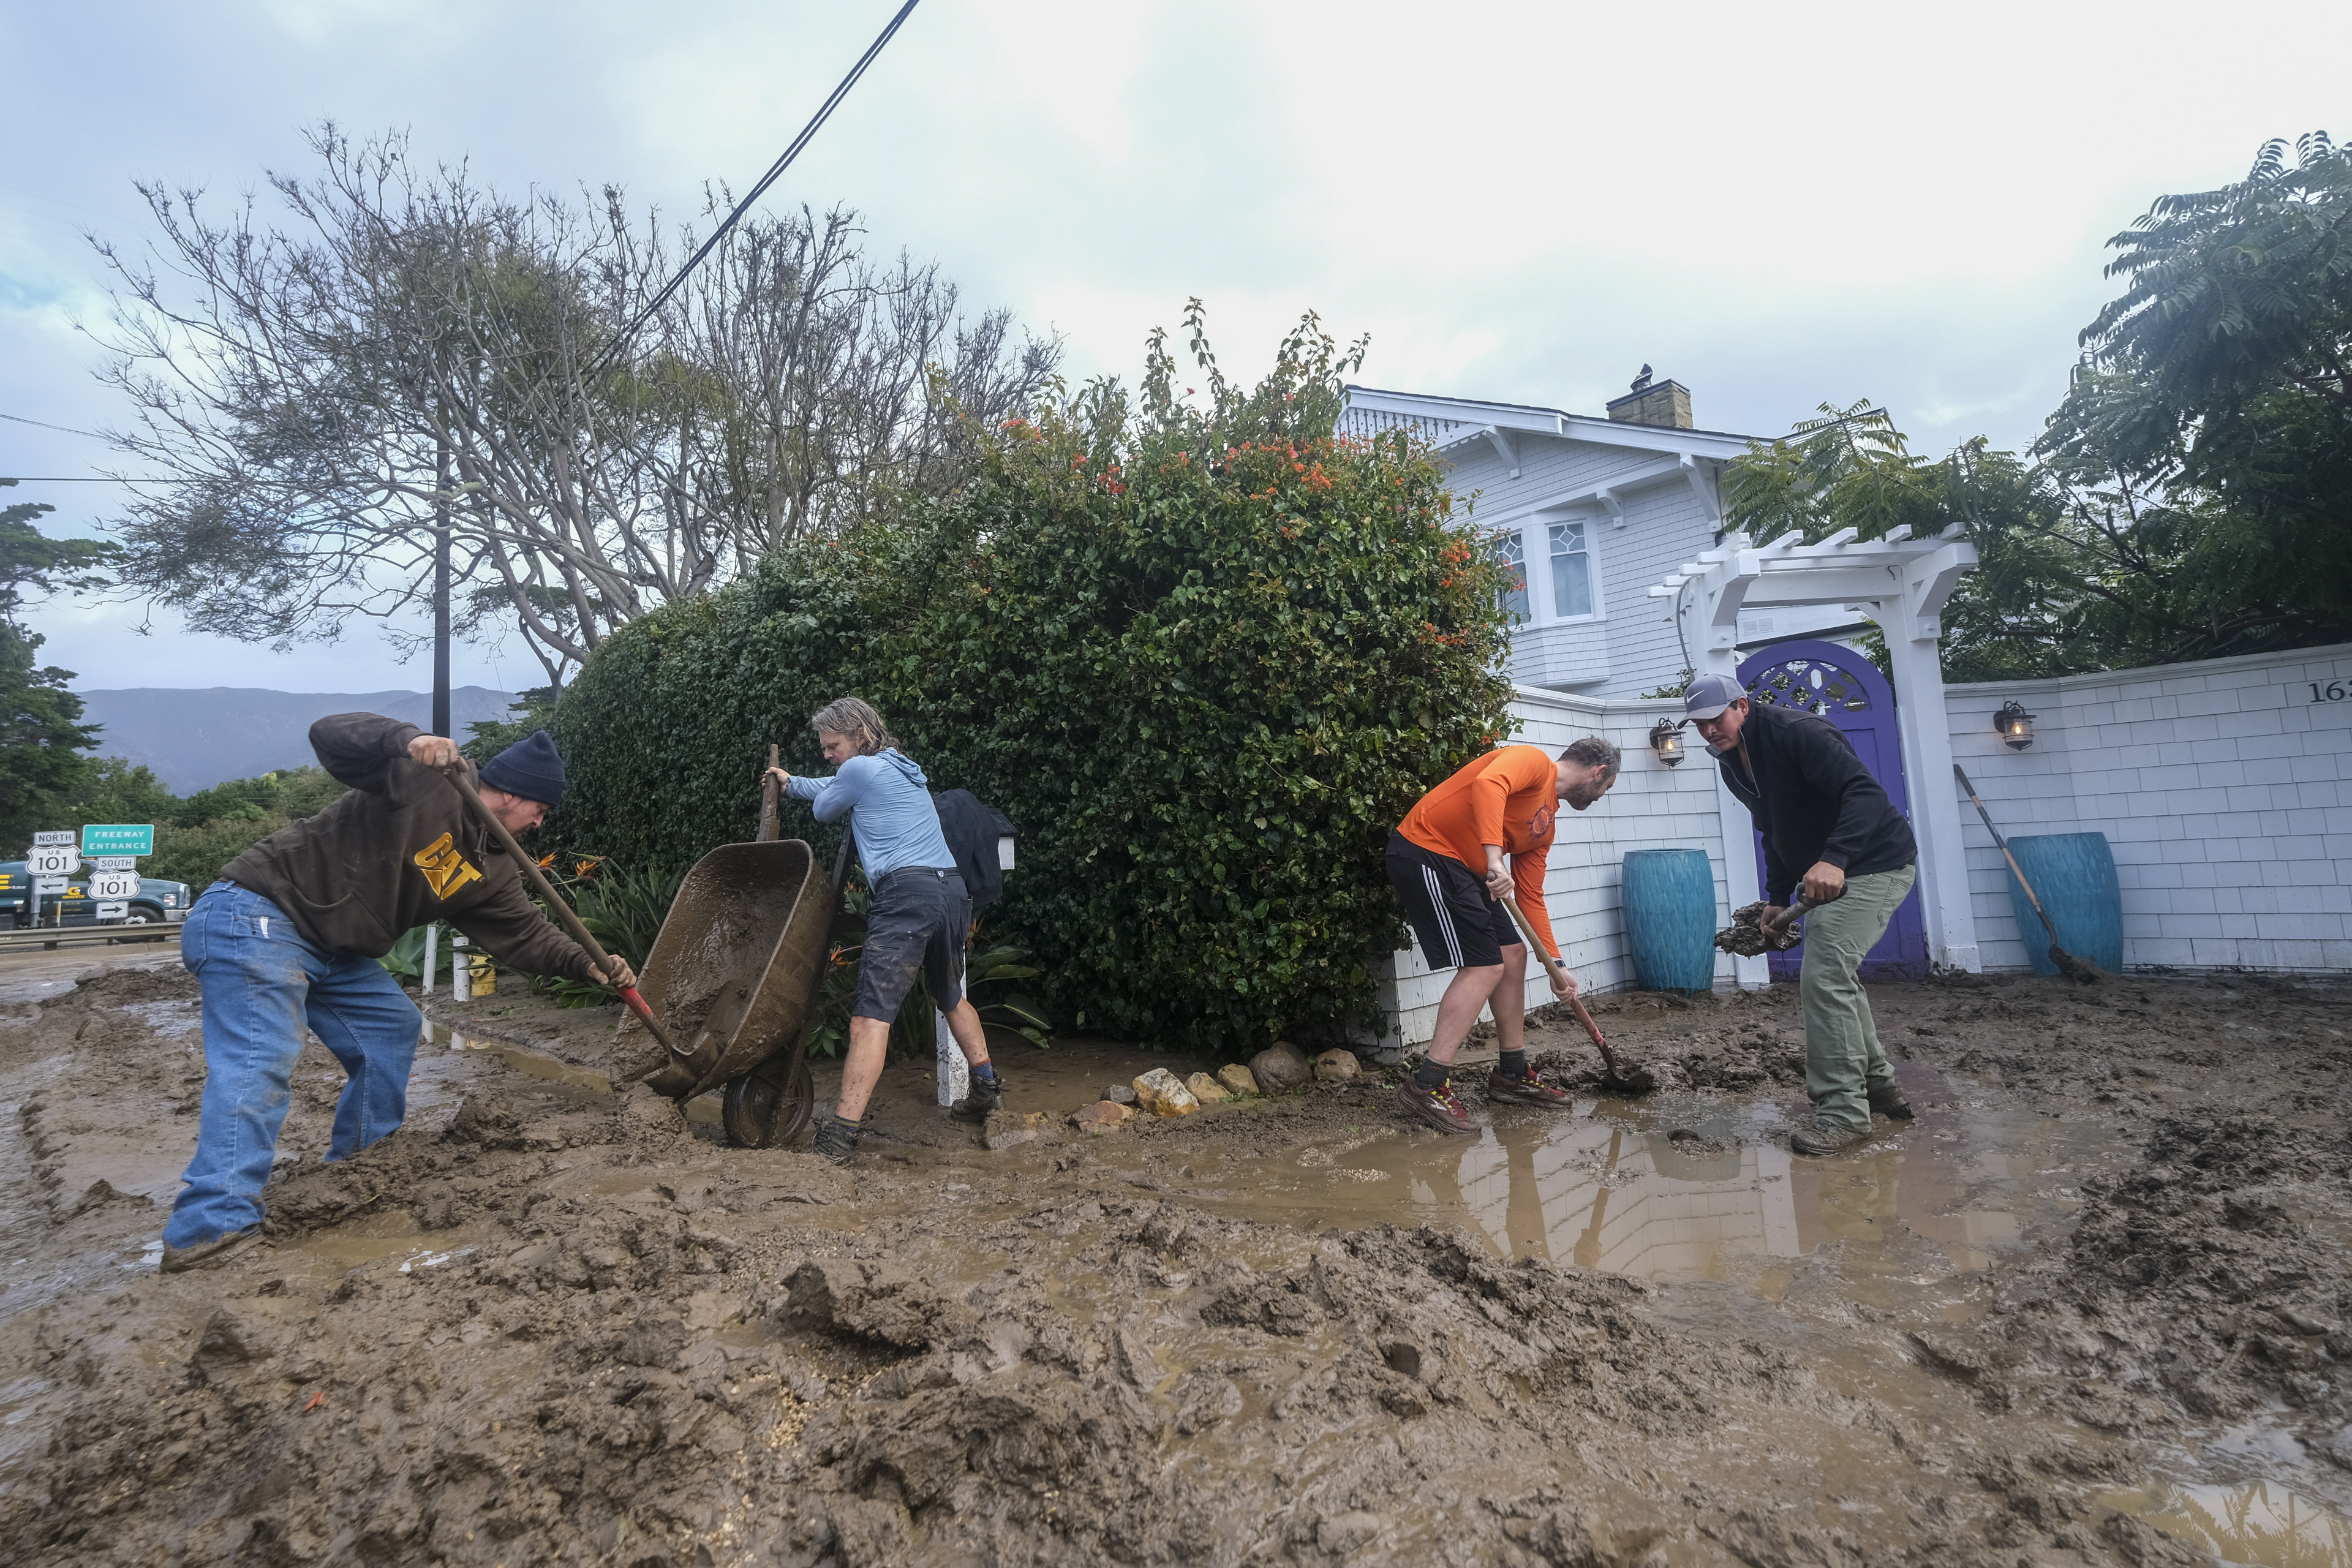 People shovel mud from the front of a home near Highway 101 in Montecito, Calif., Tuesday, Jan. 10, 2023.